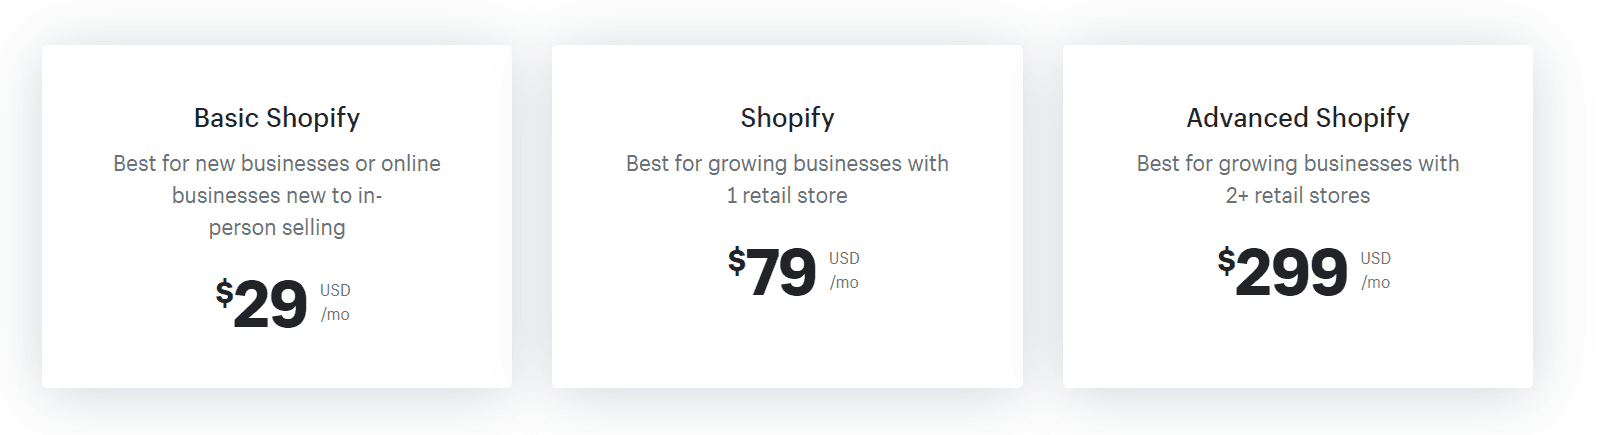 Shopify Pricing At A Glance